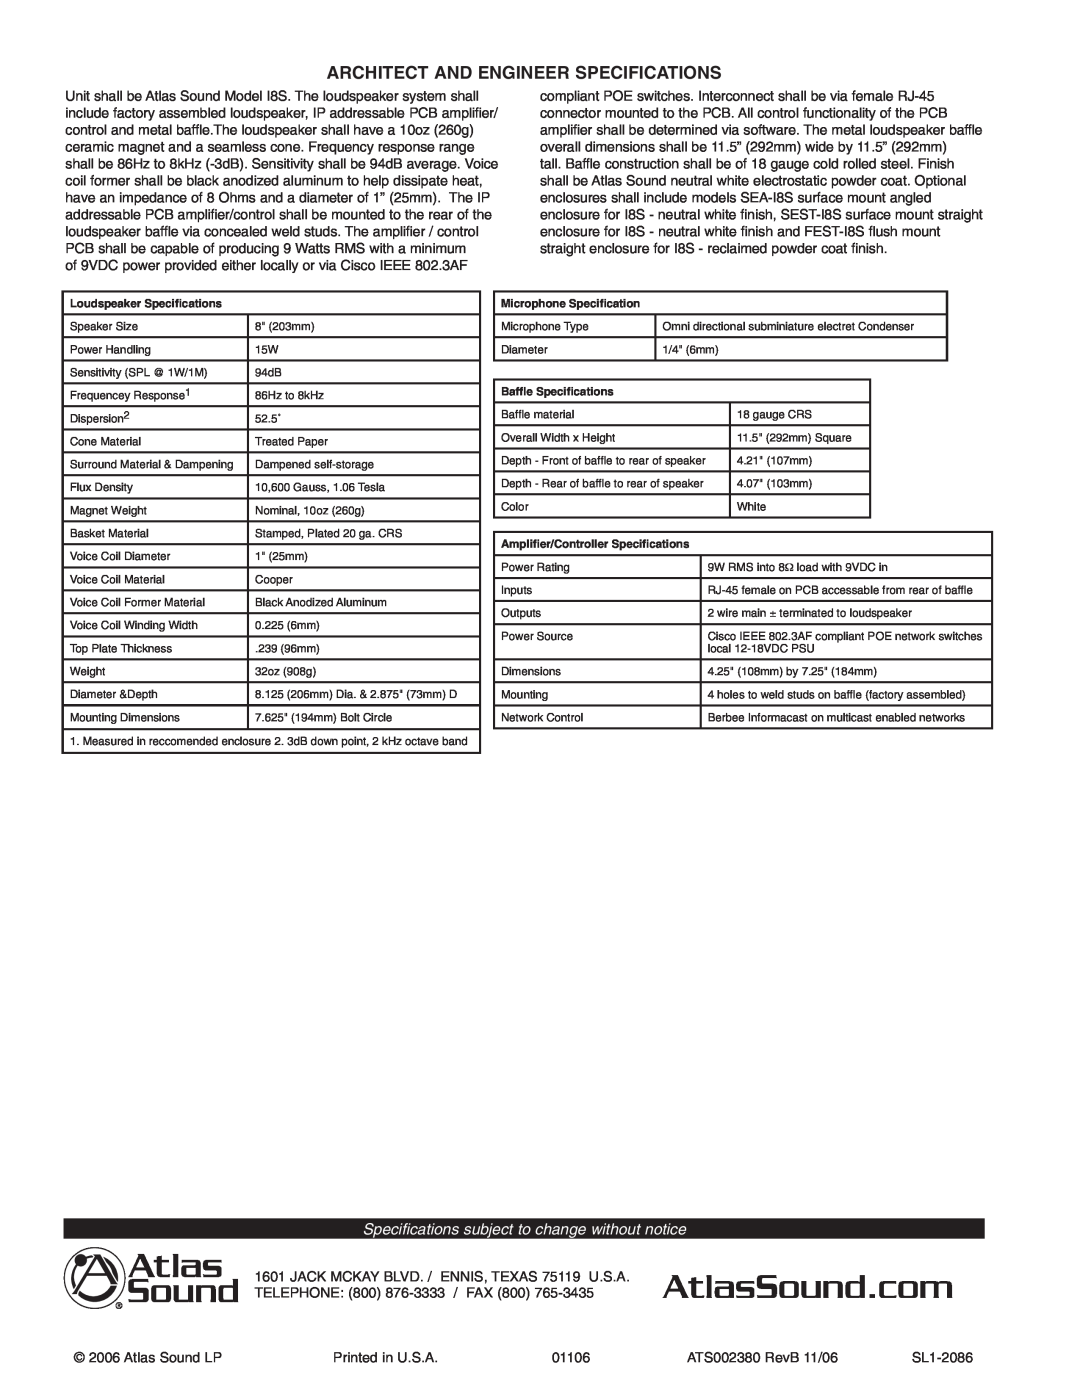 Atlas Sound SEA-18S Architect And Engineer Specifications, Specifications subject to change without notice, SL1-2086 